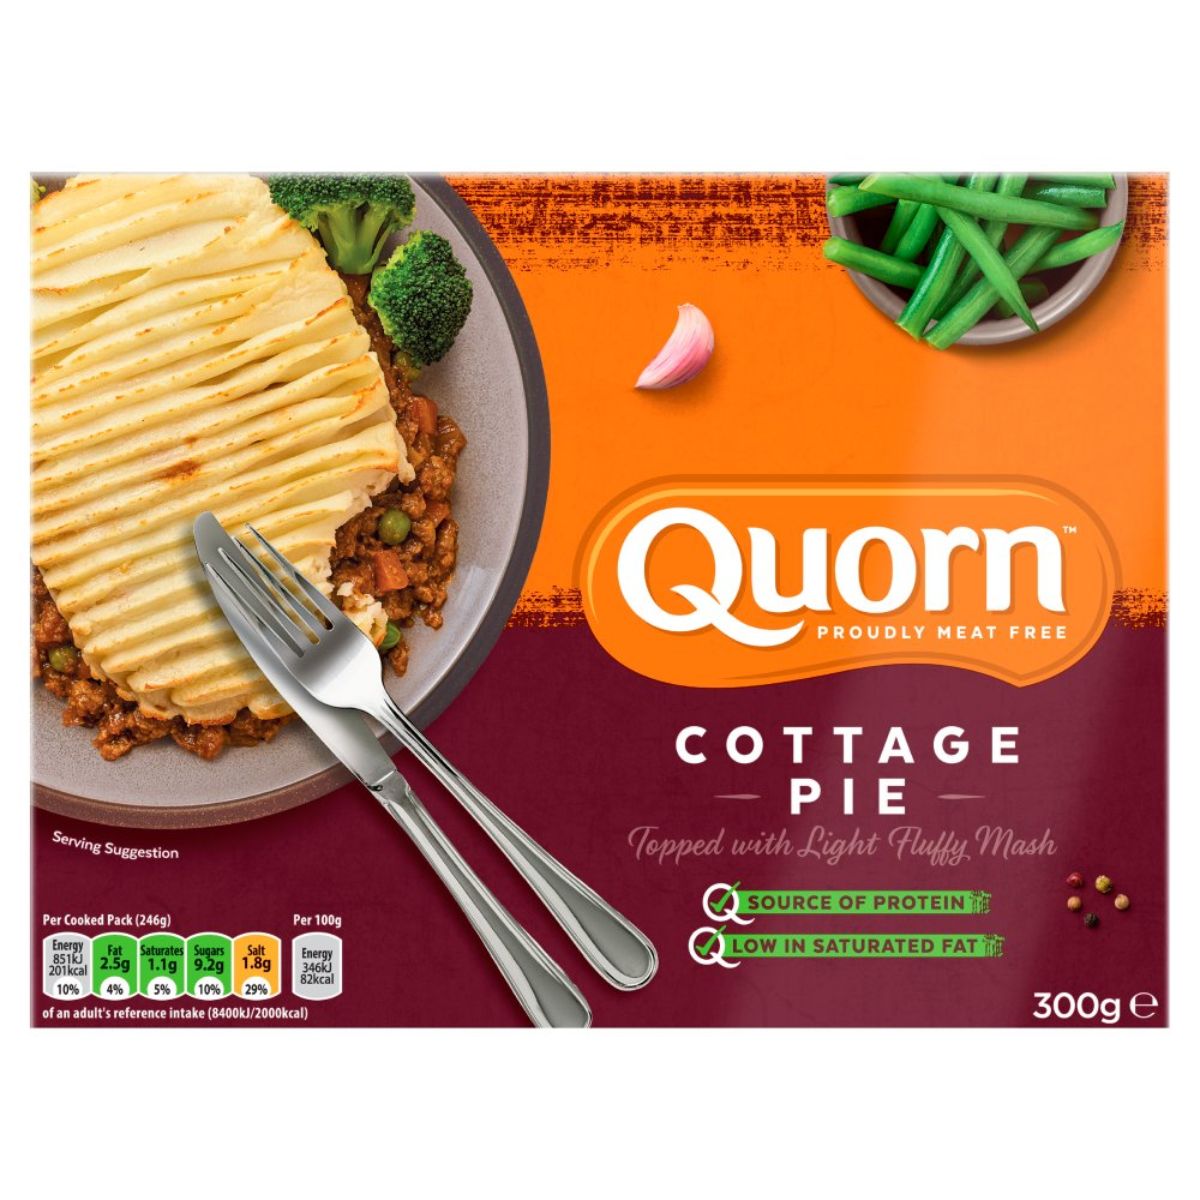 A box of Quorn Cottage Pie Ready Meal - 300g with a fork and fork.